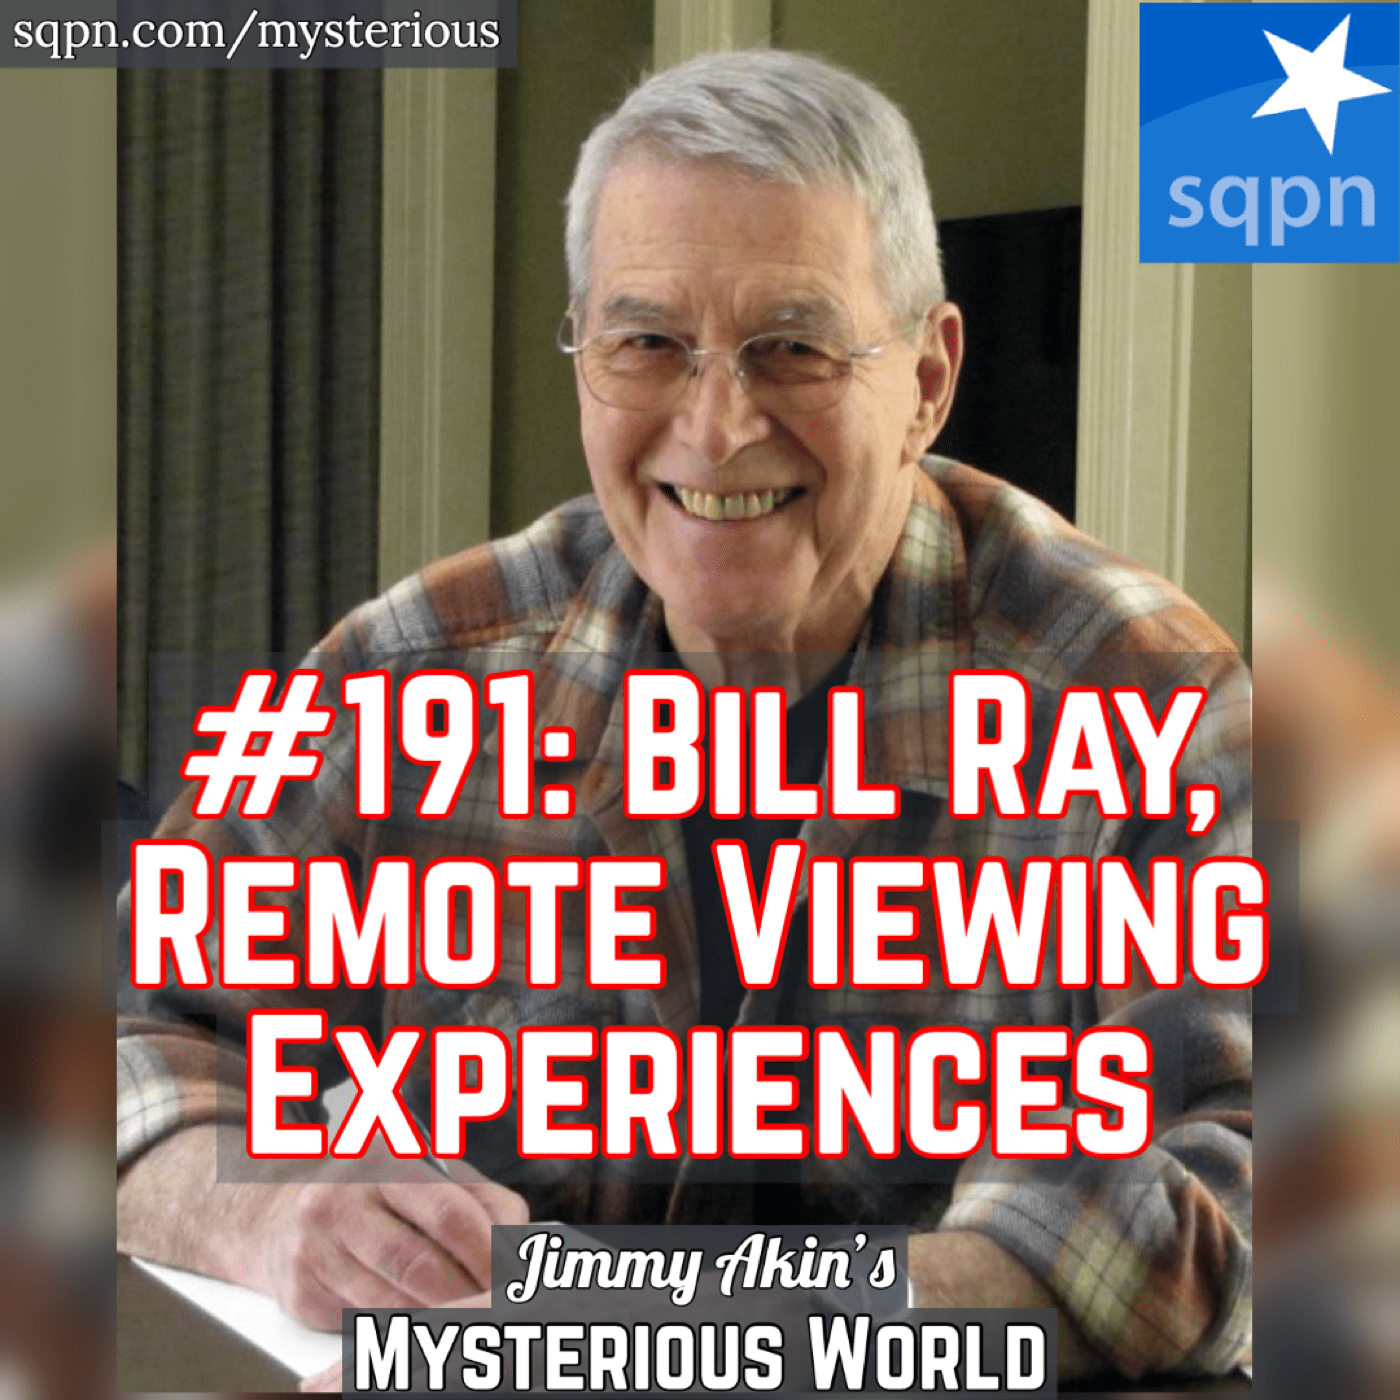 Bill Ray, Dramatic Remote Viewing Experiences (Aliens, UFOs, Ark of the Covenant, Roswell, Star Gate, Stargate)